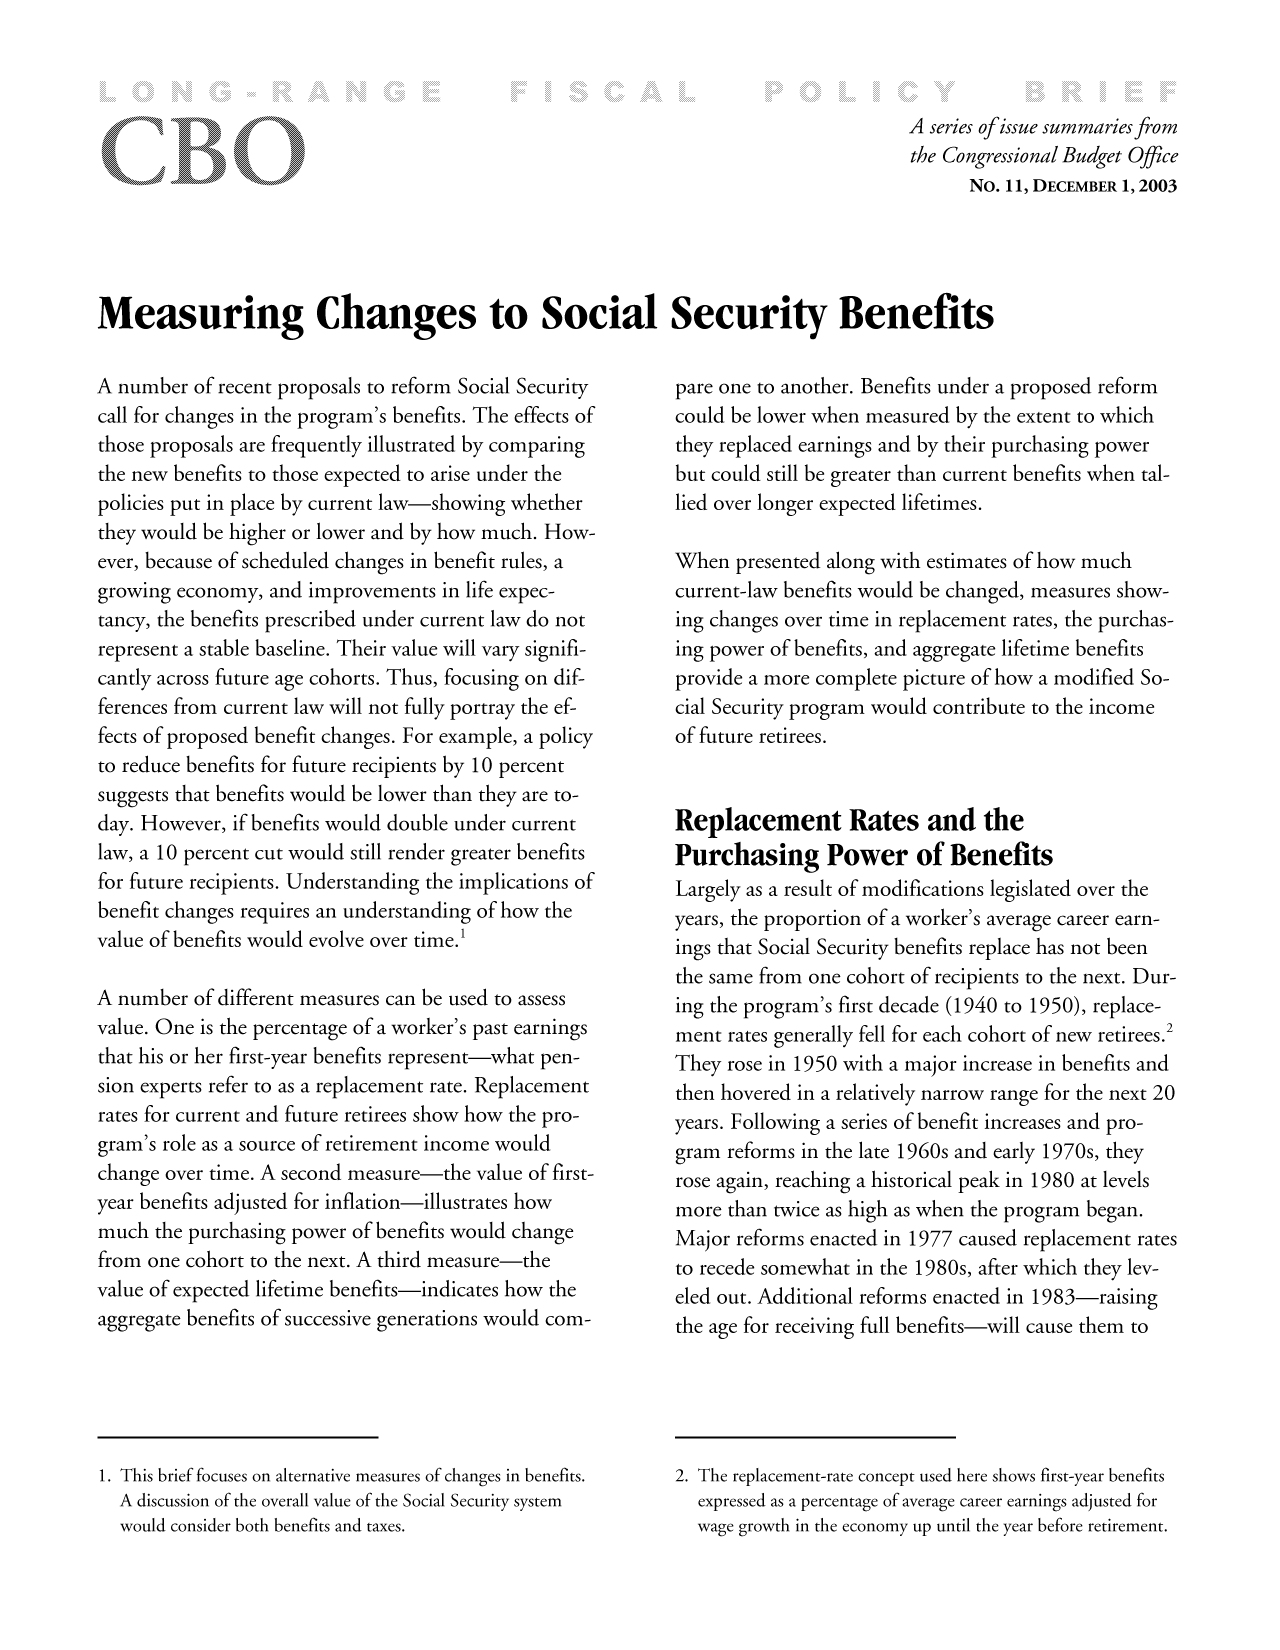 handle is hein.congrec/cbo10167 and id is 1 raw text is: A series ofissue summaries from
the Congressional Budget Office
No. 11, DECEMBER 1,2003
Measuring Changes to Social Security Benefits

A number of recent proposals to reform Social Security
call for changes in the program's benefits. The effects of
those proposals are frequently illustrated by comparing
the new benefits to those expected to arise under the
policies put in place by current law-showing whether
they would be higher or lower and by how much. How-
ever, because of scheduled changes in benefit rules, a
growing economy, and improvements in life expec-
tancy, the benefits prescribed under current law do not
represent a stable baseline. Their value will vary signifi-
cantly across future age cohorts. Thus, focusing on dif-
ferences from current law will not fully portray the ef-
fects of proposed benefit changes. For example, a policy
to reduce benefits for future recipients by 10 percent
suggests that benefits would be lower than they are to-
day. However, if benefits would double under current
law, a 10 percent cut would still render greater benefits
for future recipients. Understanding the implications of
benefit changes requires an understanding of how the
value of benefits would evolve over time.'
A number of different measures can be used to assess
value. One is the percentage of a worker's past earnings
that his or her first-year benefits represent-what pen-
sion experts refer to as a replacement rate. Replacement
rates for current and future retirees show how the pro-
gram's role as a source of retirement income would
change over time. A second measure-the value of first-
year benefits adjusted for inflation-illustrates how
much the purchasing power of benefits would change
from one cohort to the next. A third measure-the
value of expected lifetime benefits-indicates how the
aggregate benefits of successive generations would com-

pare one to another. Benefits under a proposed reform
could be lower when measured by the extent to which
they replaced earnings and by their purchasing power
but could still be greater than current benefits when tal-
lied over longer expected lifetimes.
When presented along with estimates of how much
current-law benefits would be changed, measures show-
ing changes over time in replacement rates, the purchas-
ing power of benefits, and aggregate lifetime benefits
provide a more complete picture of how a modified So-
cial Security program would contribute to the income
of future retirees.
Replacement Rates and the
Purchasing Power of Benefits
Largely as a result of modifications legislated over the
years, the proportion of a worker's average career earn-
ings that Social Security benefits replace has not been
the same from one cohort of recipients to the next. Dur-
ing the program's first decade (1940 to 1950), replace-
ment rates generally fell for each cohort of new retirees.2
They rose in 1950 with a major increase in benefits and
then hovered in a relatively narrow range for the next 20
years. Following a series of benefit increases and pro-
gram reforms in the late 1960s and early 1970s, they
rose again, reaching a historical peak in 1980 at levels
more than twice as high as when the program began.
Major reforms enacted in 1977 caused replacement rates
to recede somewhat in the 1980s, after which they lev-
eled out. Additional reforms enacted in 1983-raising
the age for receiving full benefits-will cause them to

1. This brief focuses on alternative measures of changes in benefits.
A discussion of the overall value of the Social Security system
would consider both benefits and taxes.

2. The replacement-rate concept used here shows first-year benefits
expressed as a percentage of average career earnings adjusted for
wage growth in the economy up until the year before retirement.


